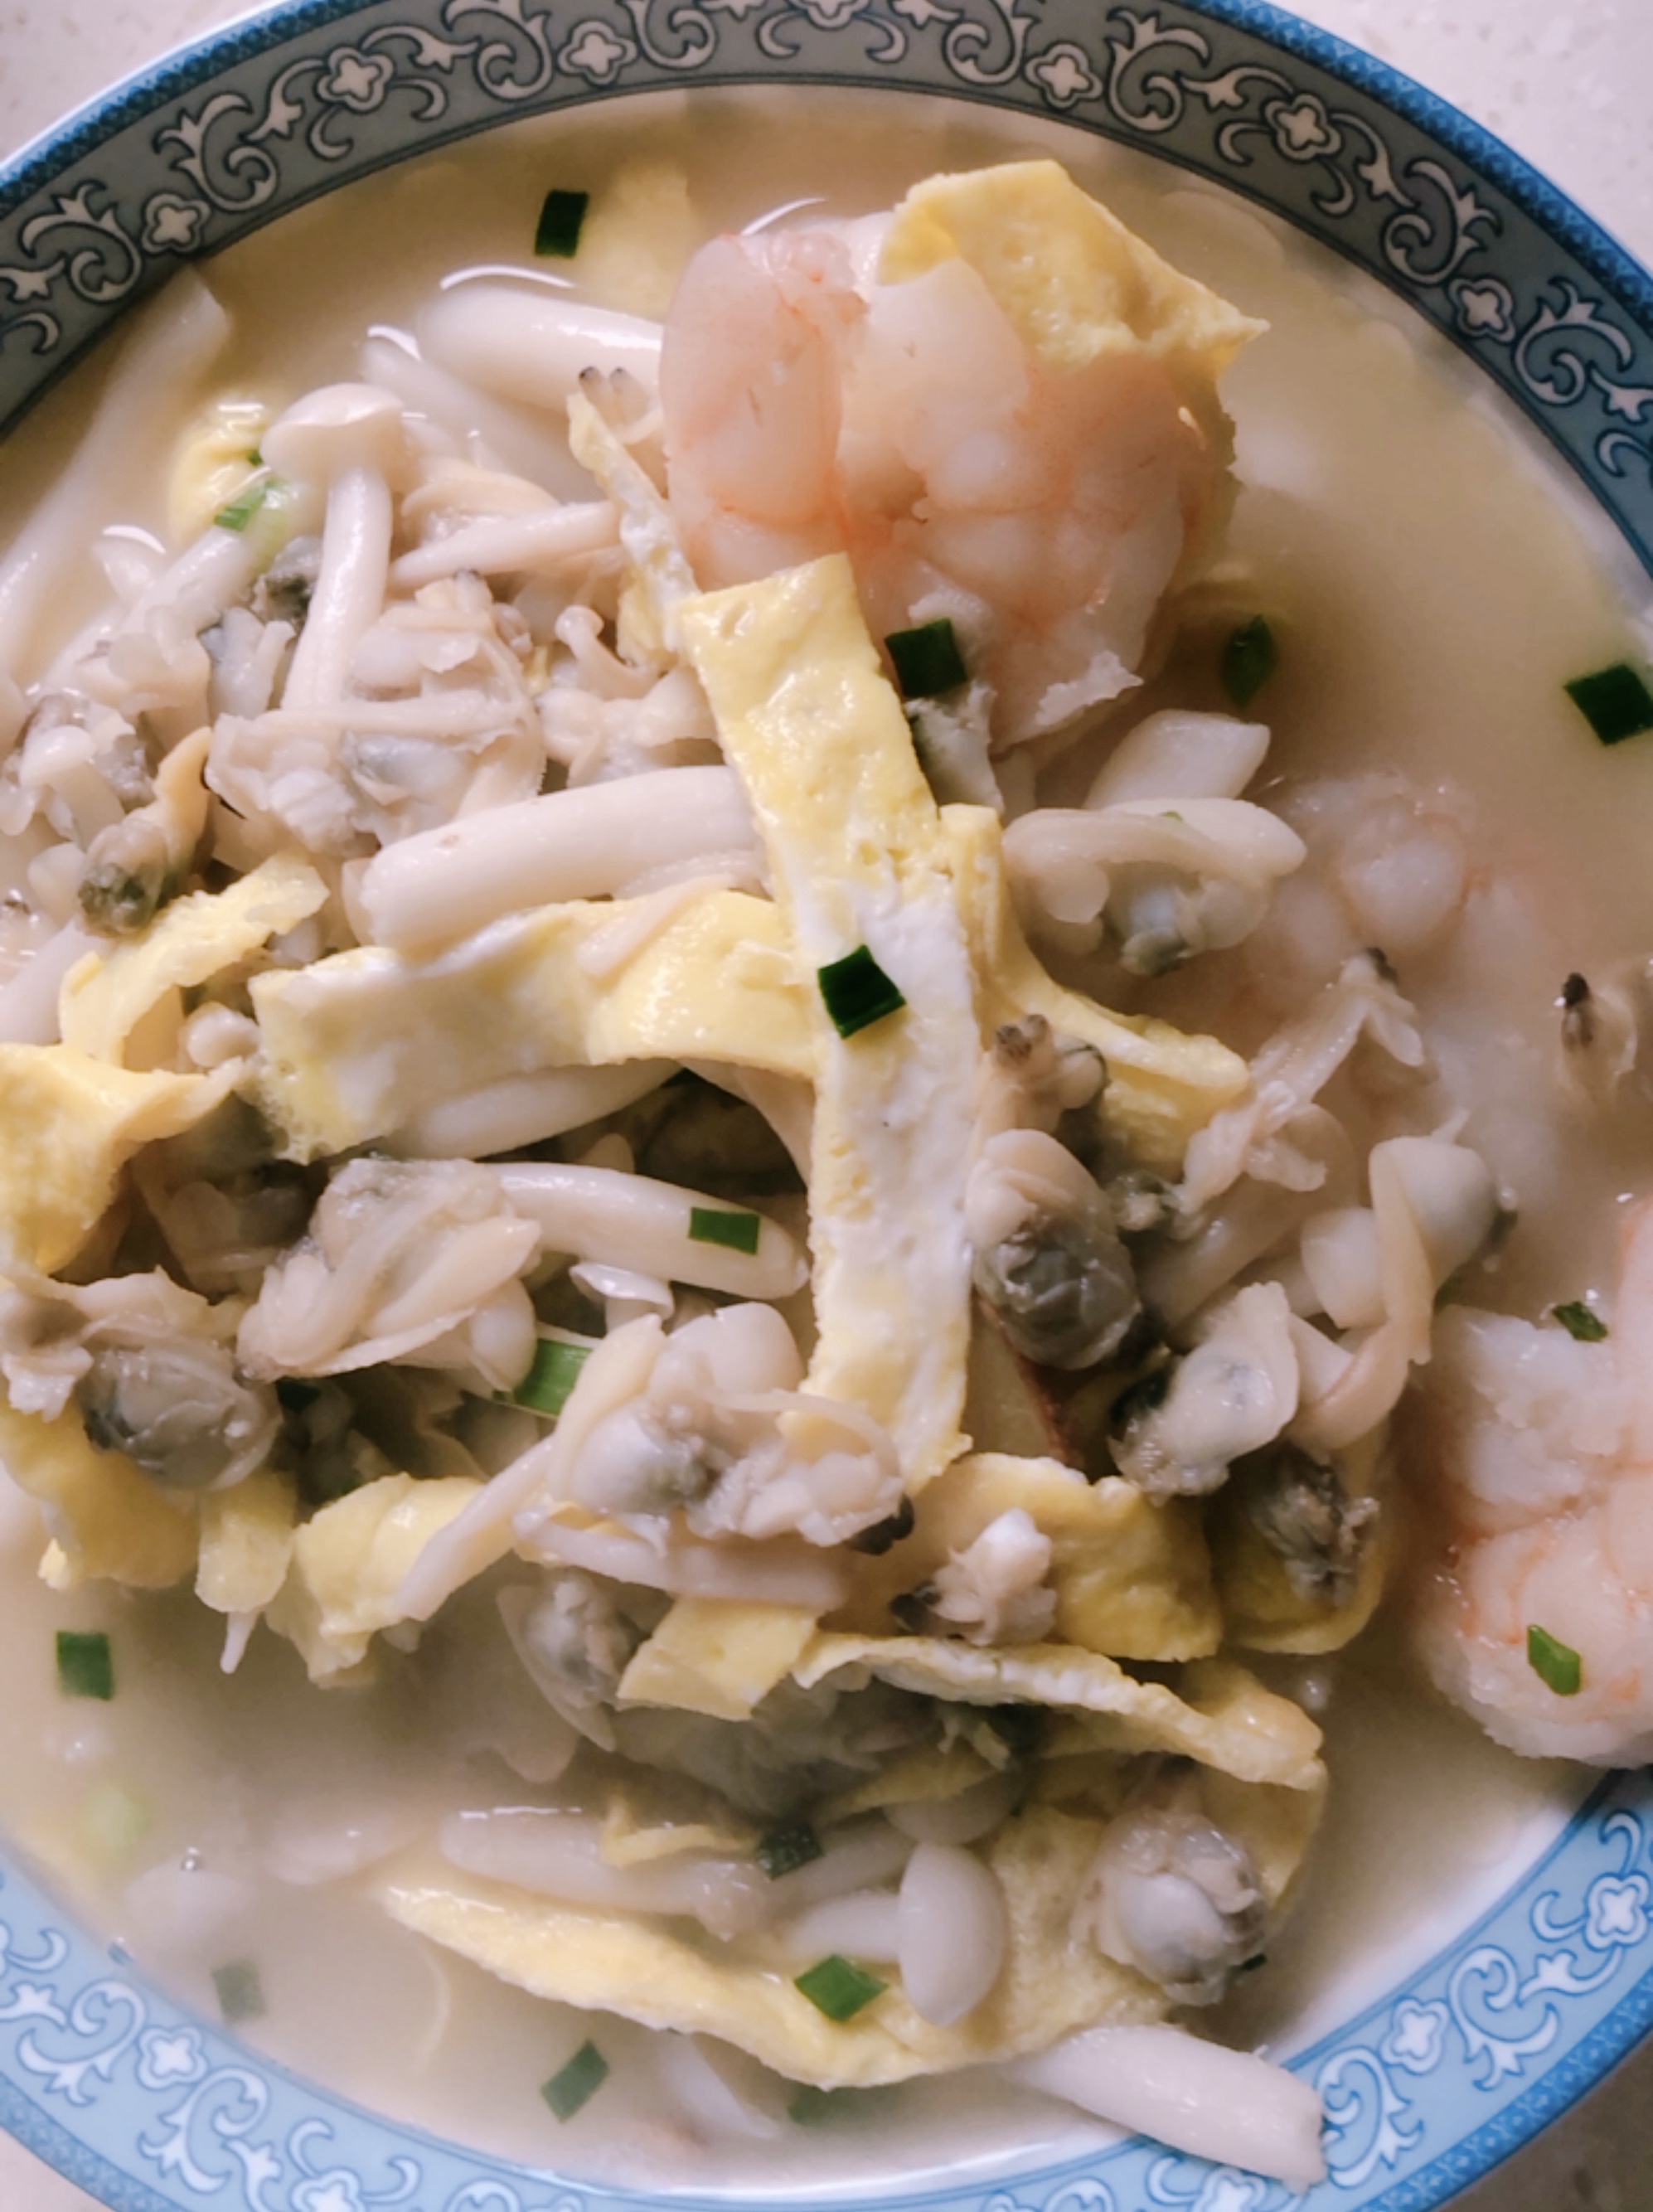 
The practice of soup of seafood bacterium mushroom, how is soup of seafood bacterium mushroom done delicious